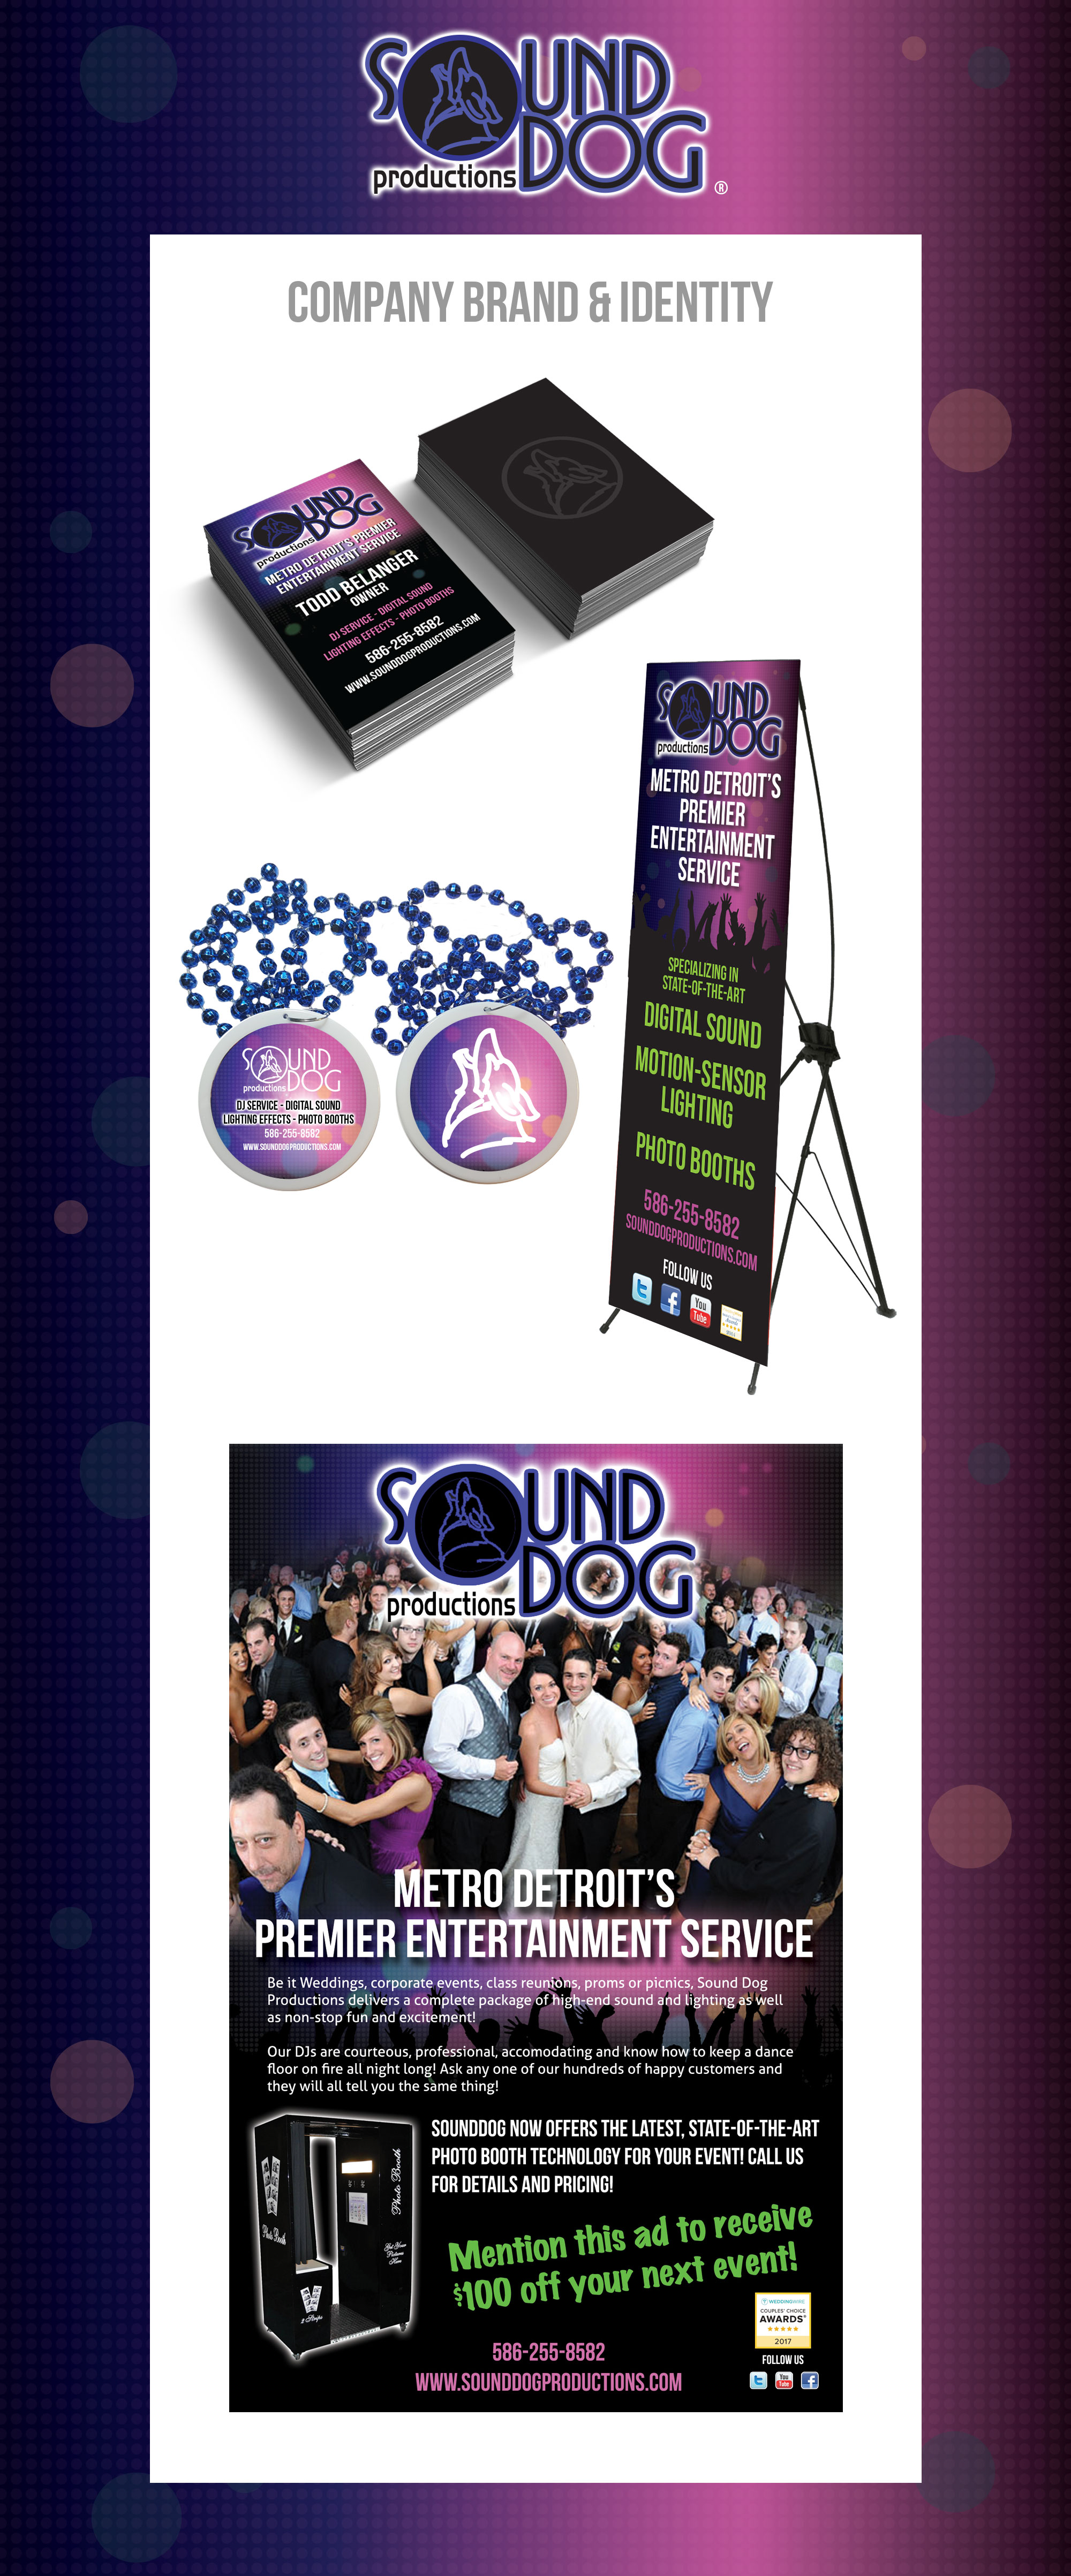 SoundDog Productions - Printed Marketing Collateral